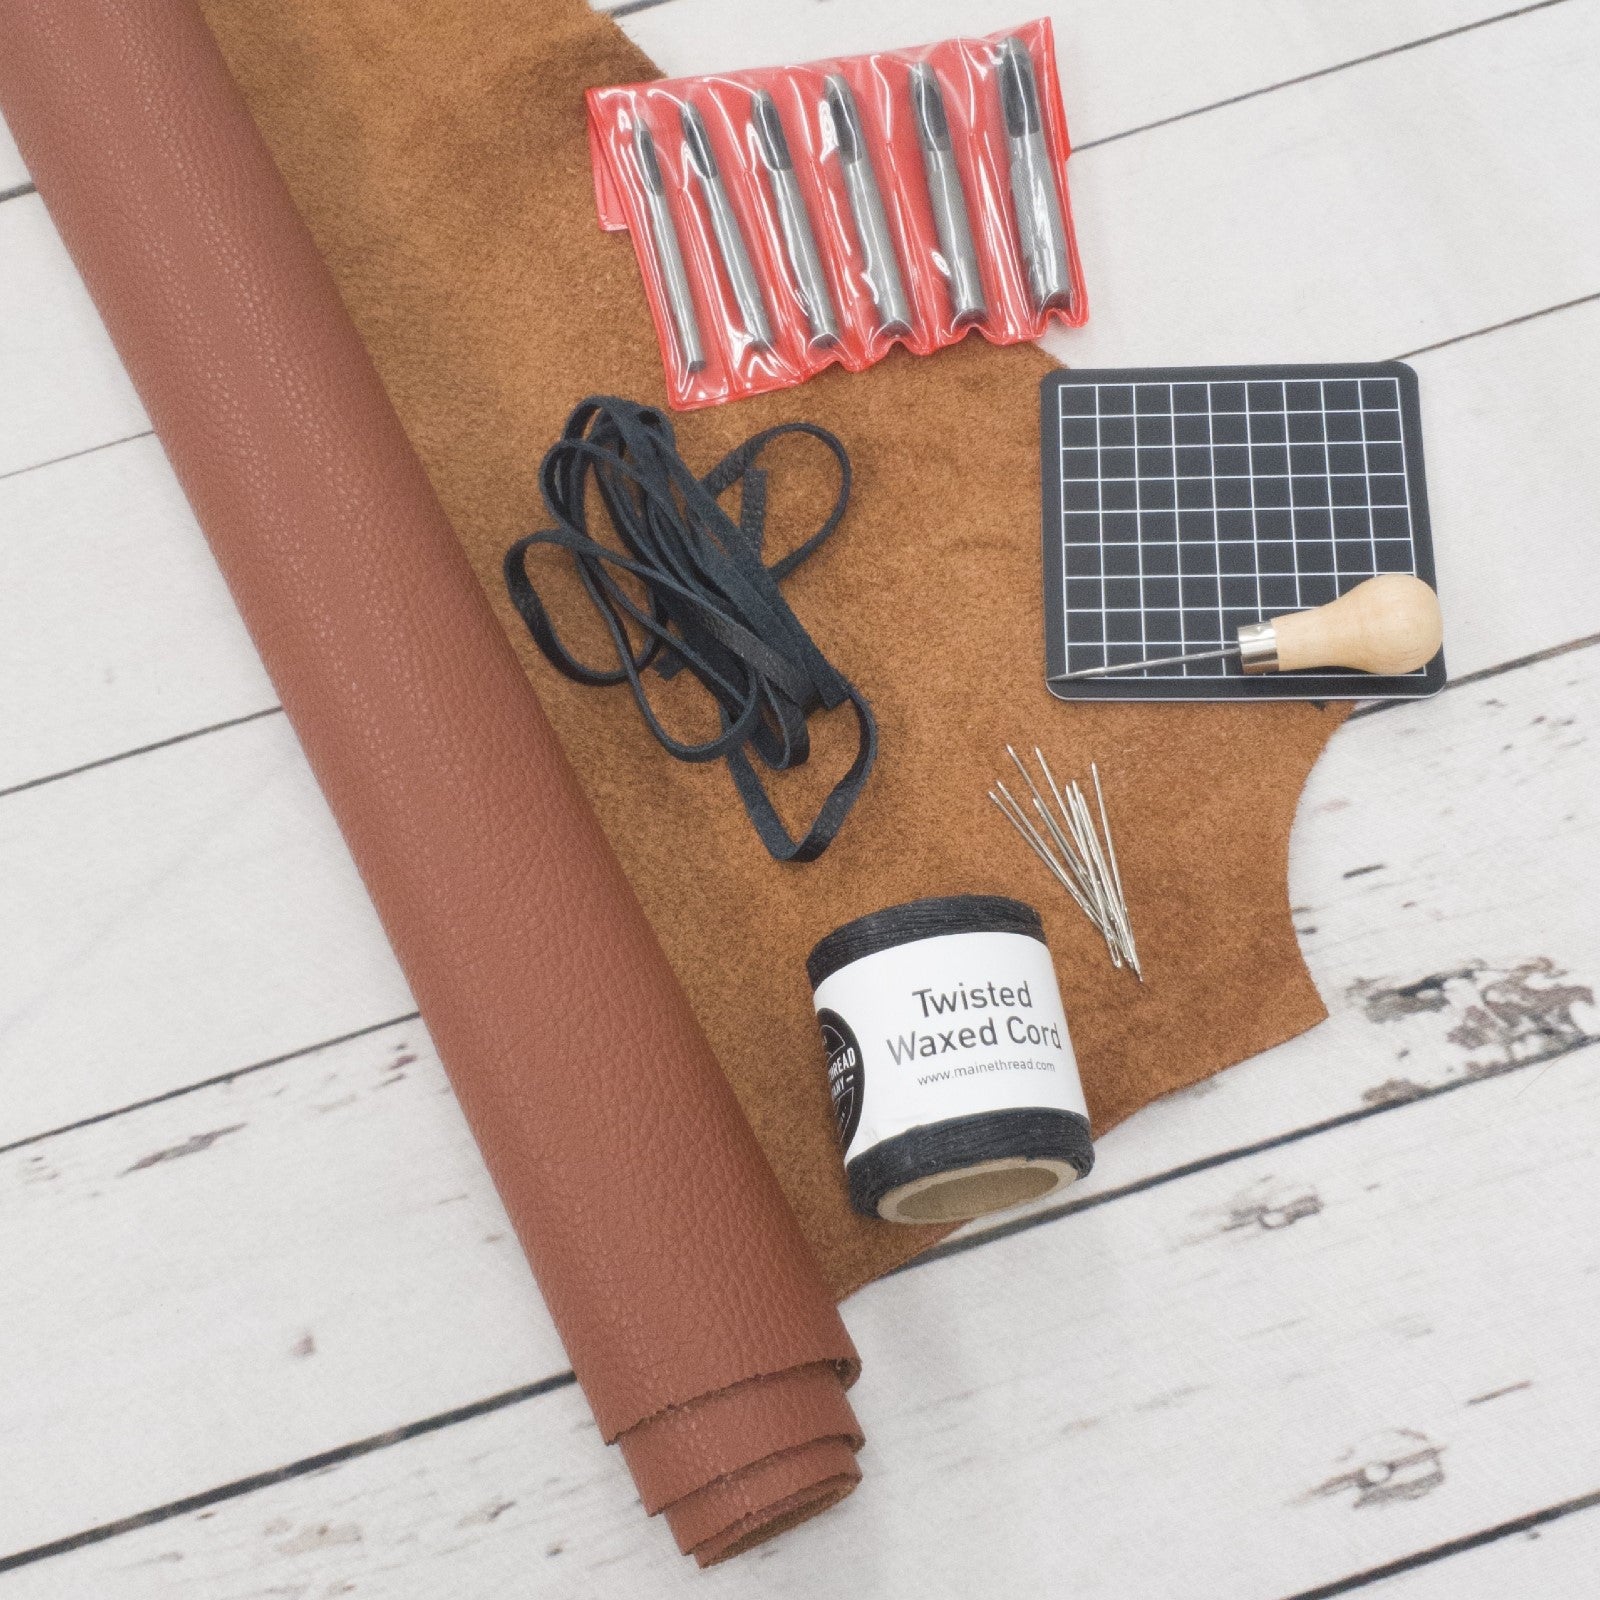 DIY Sun Sandal Complete Kit with Guide, Leather, and Tools, With Pattern / Tools & Leather / Saddle Tan | The Leather Guy